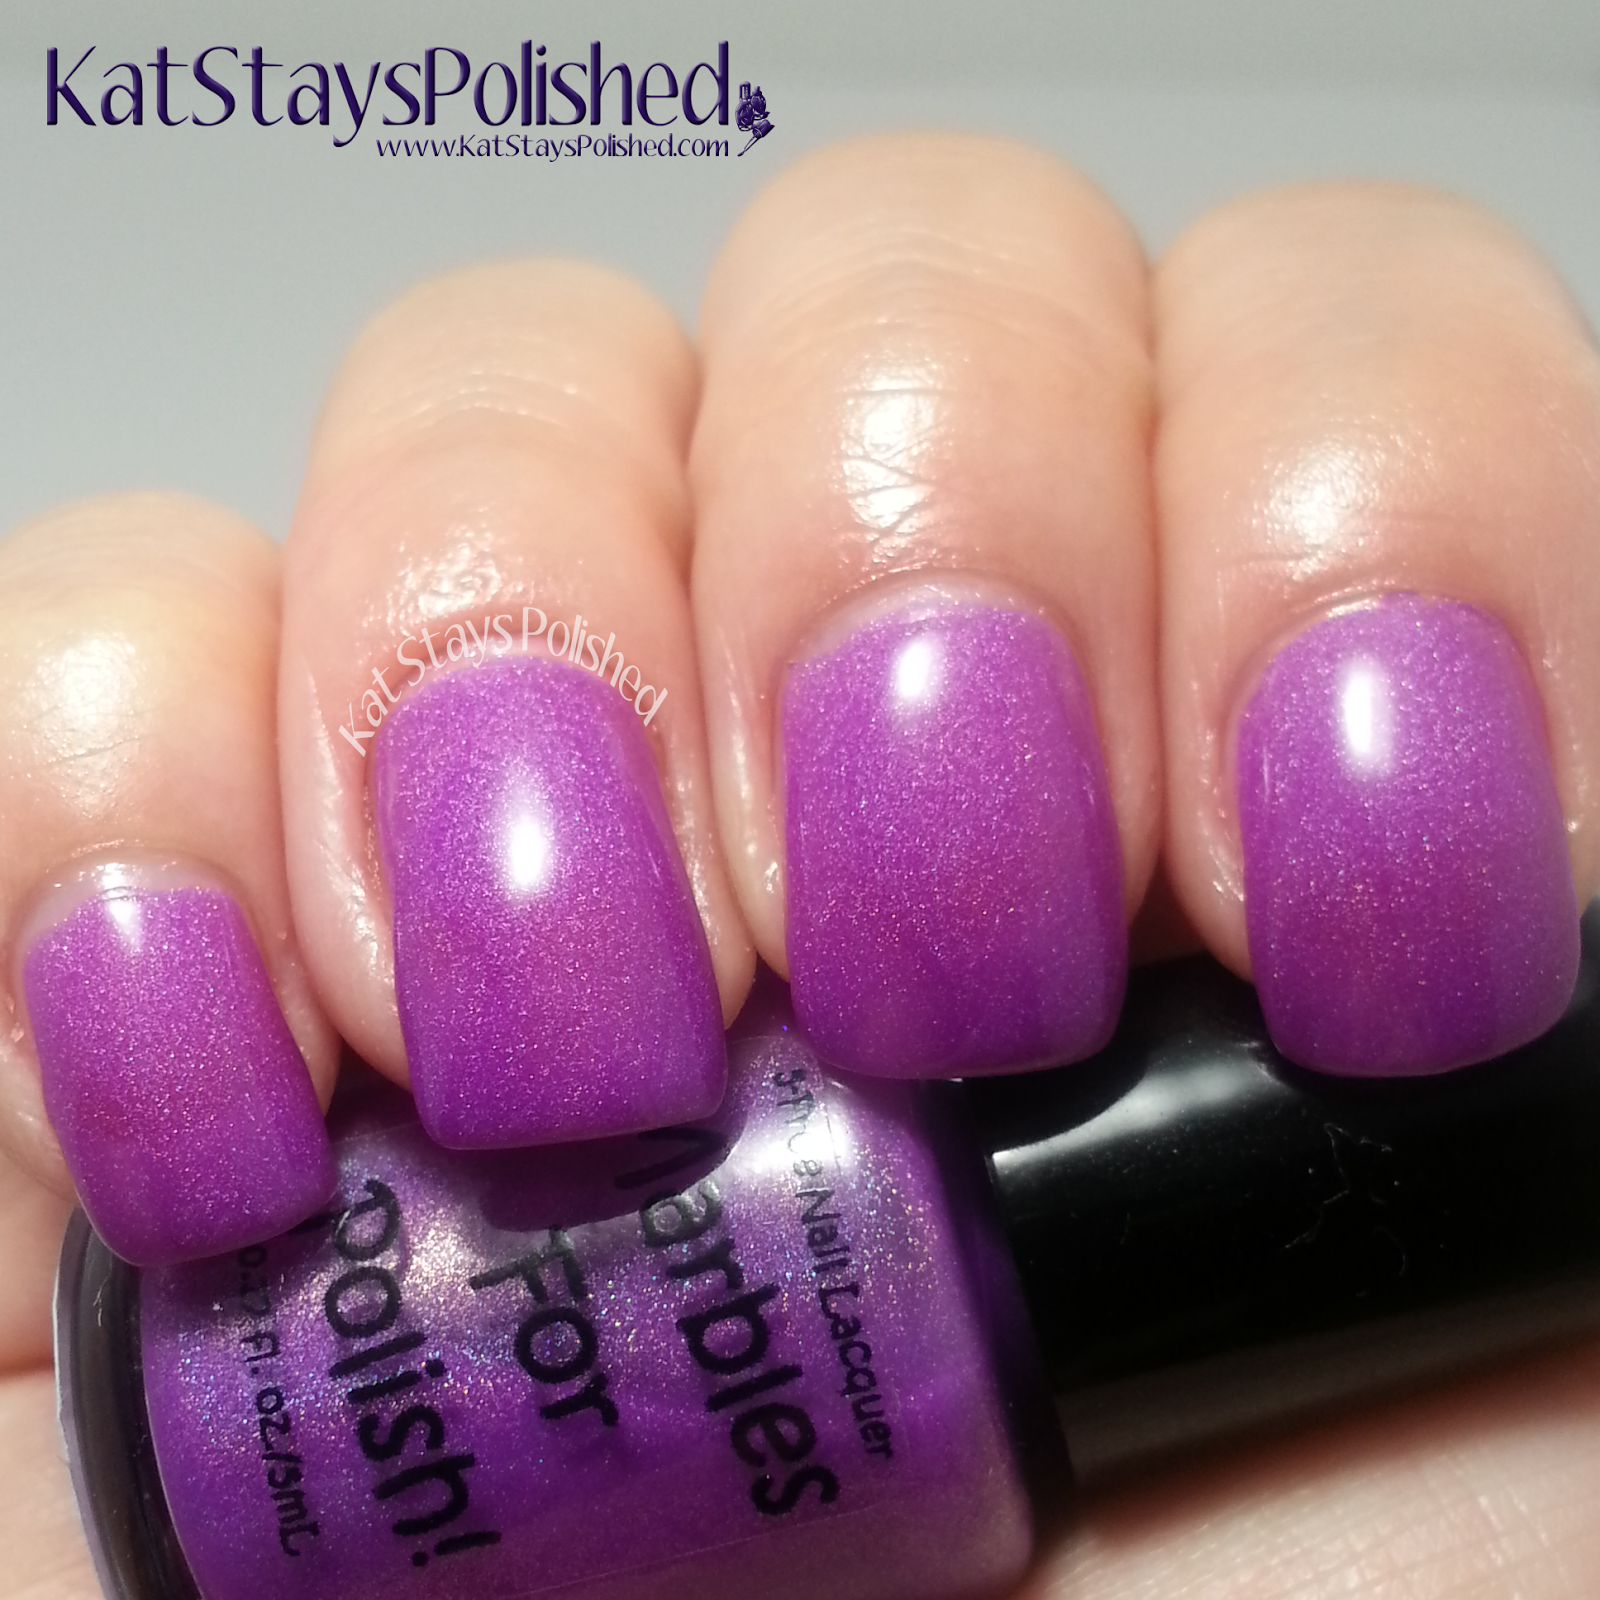 Marbles for Polish - Sweet Tooth Collection - Grape Slice | Kat Stays Polished